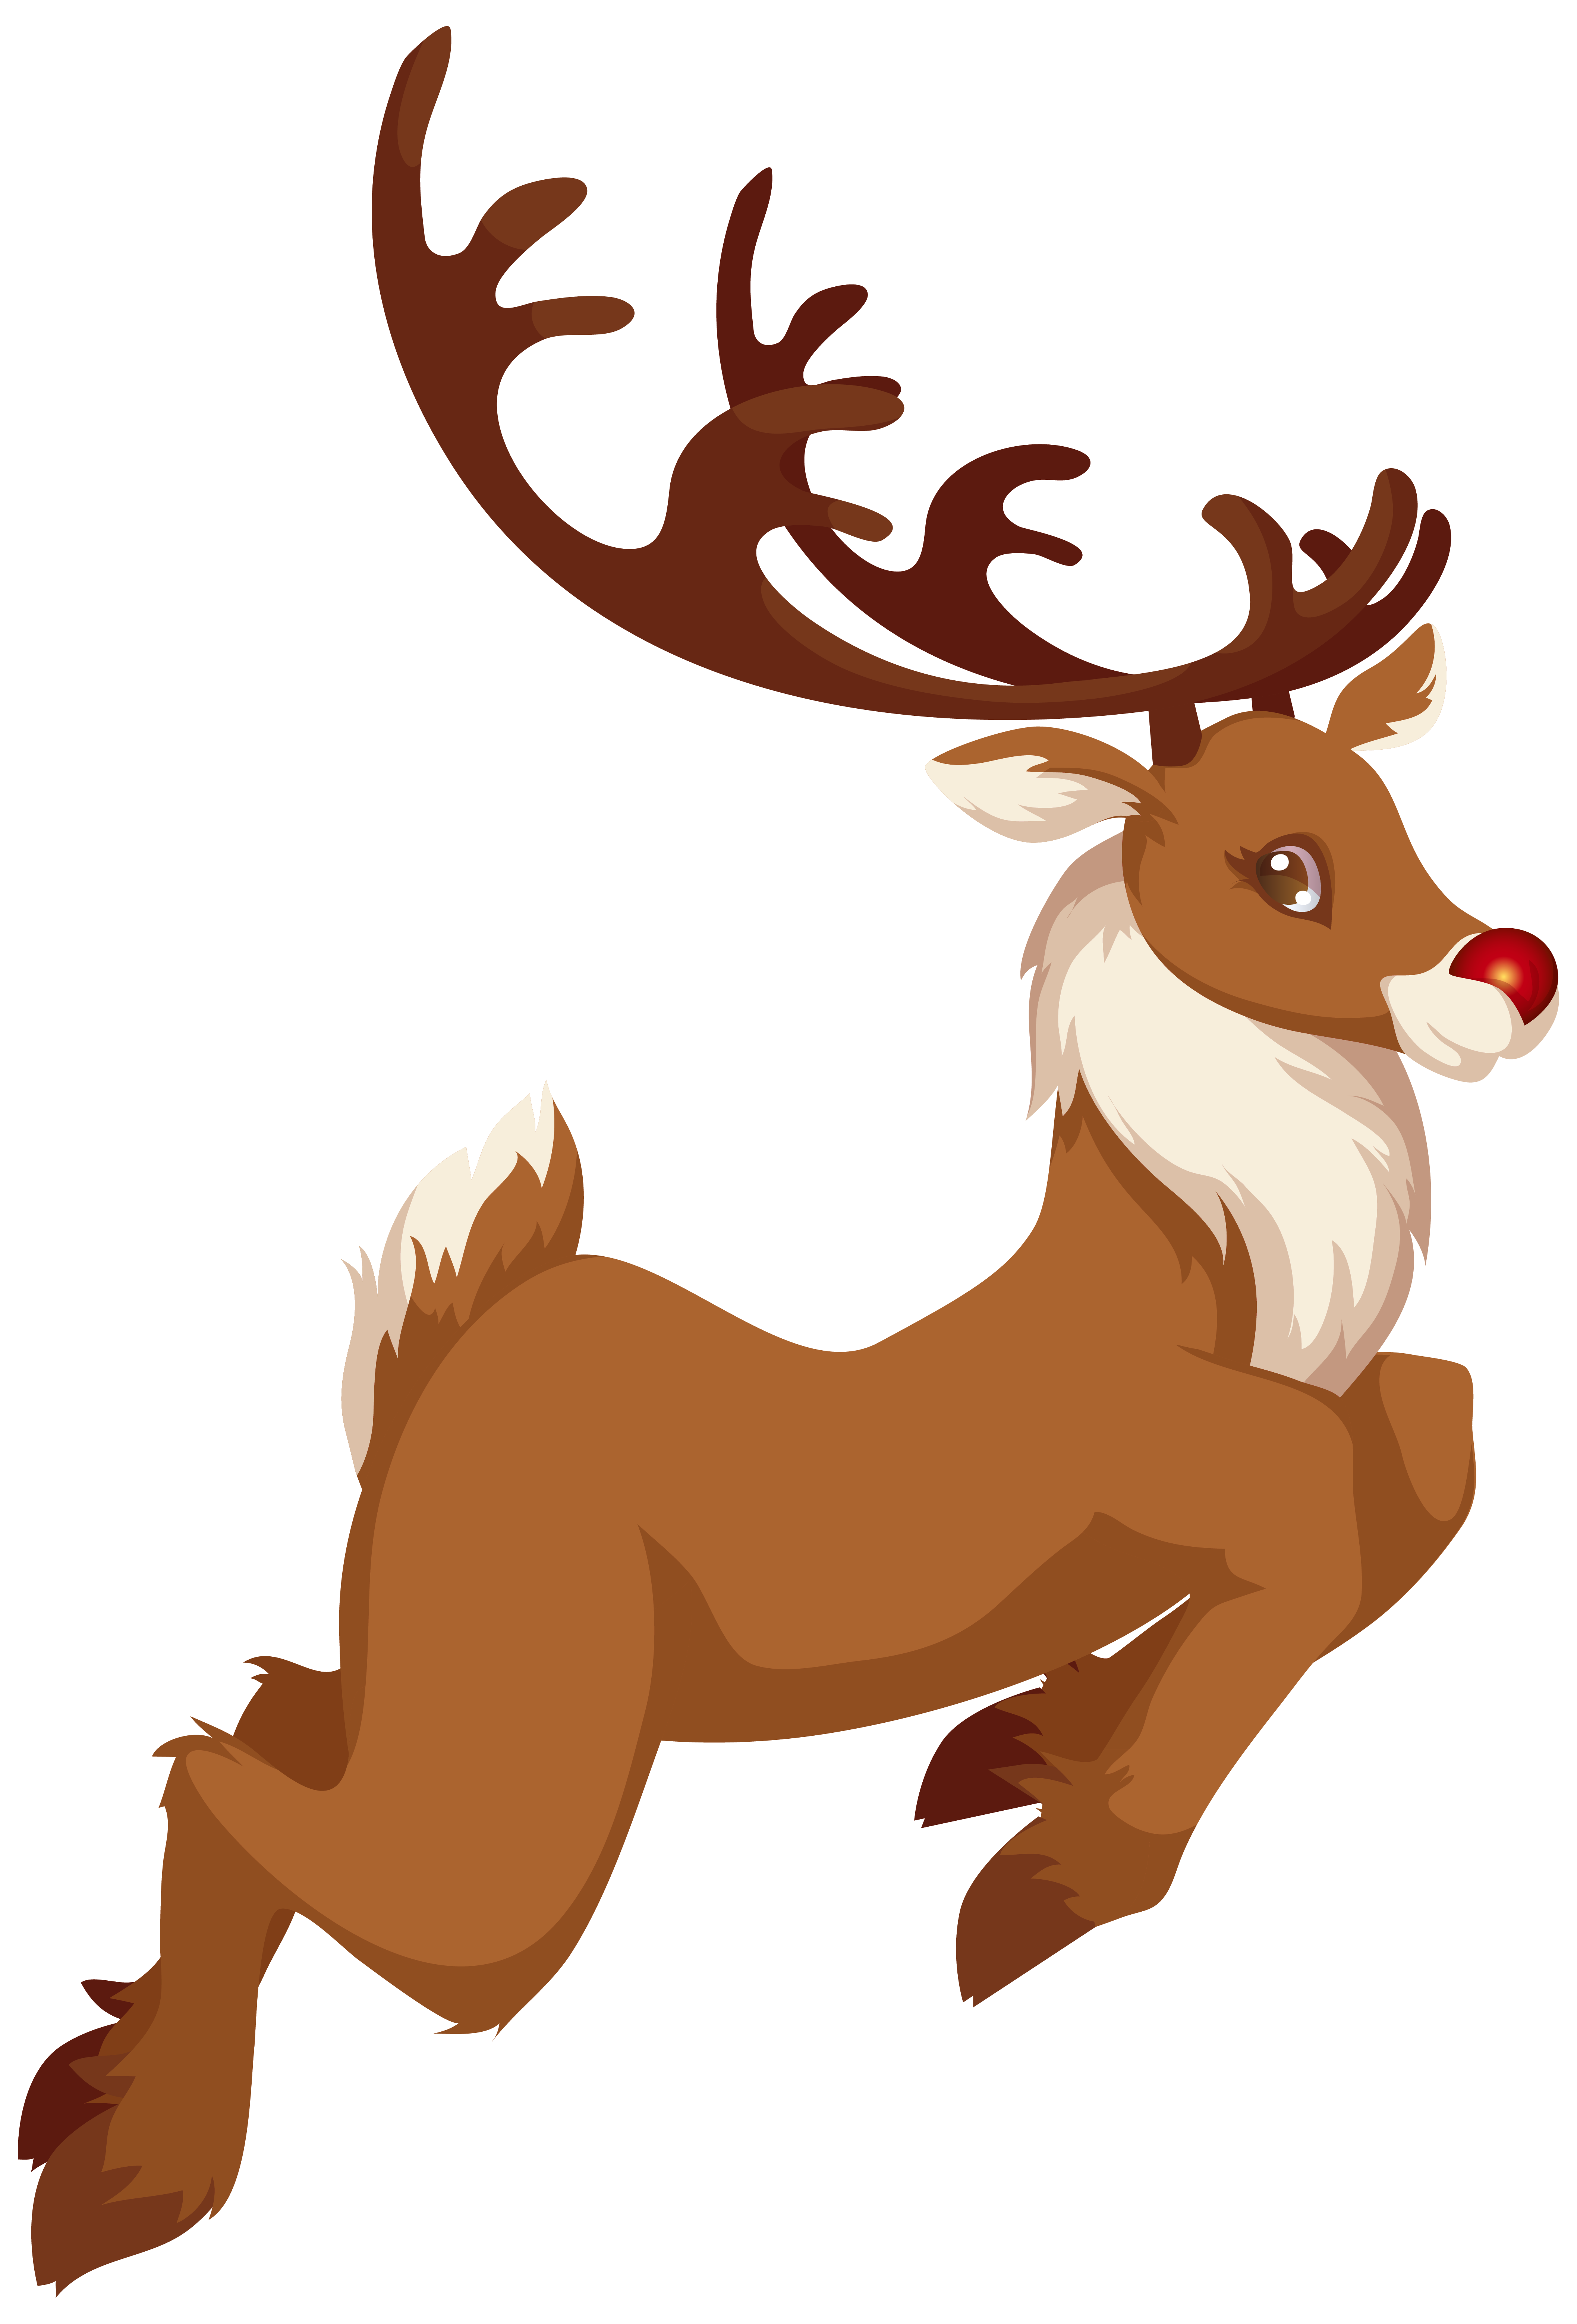 Claus Rudolph Reindeer Santa Christmas Free Download PNG HD Clipart